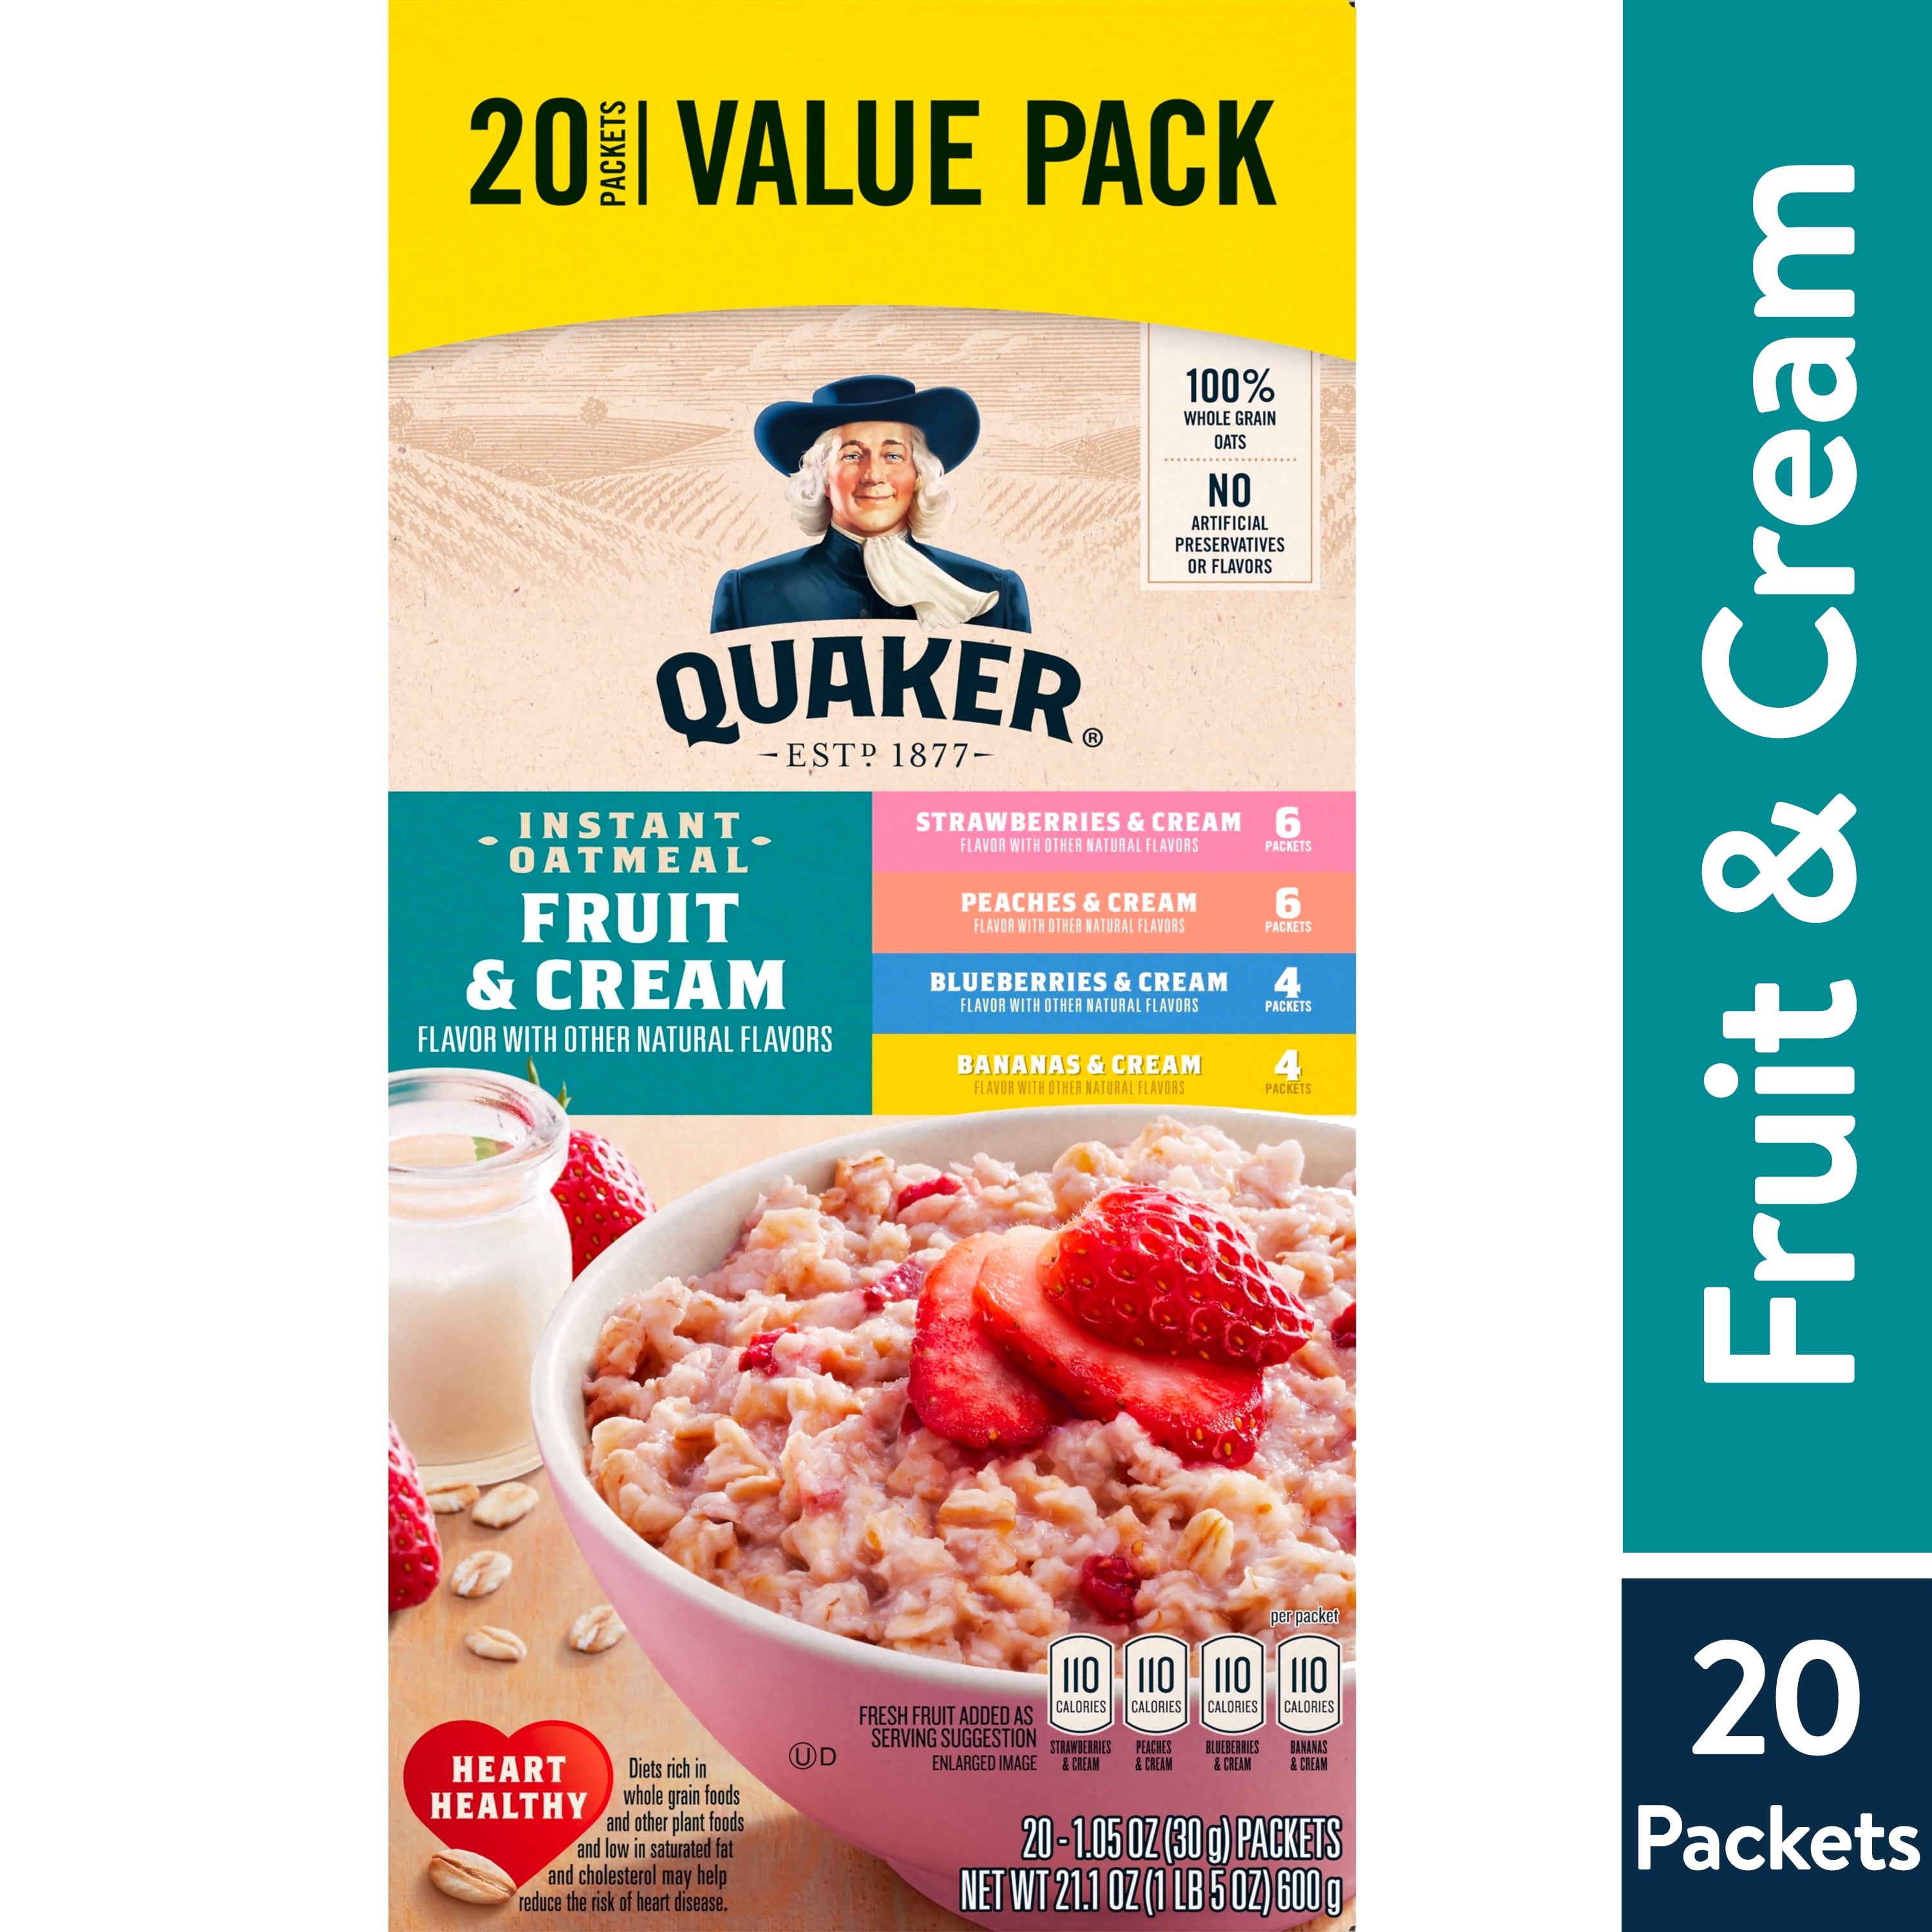 Quaker, Instant Oatmeal, Variety Value Pack, 1.51 oz, 20 Packets